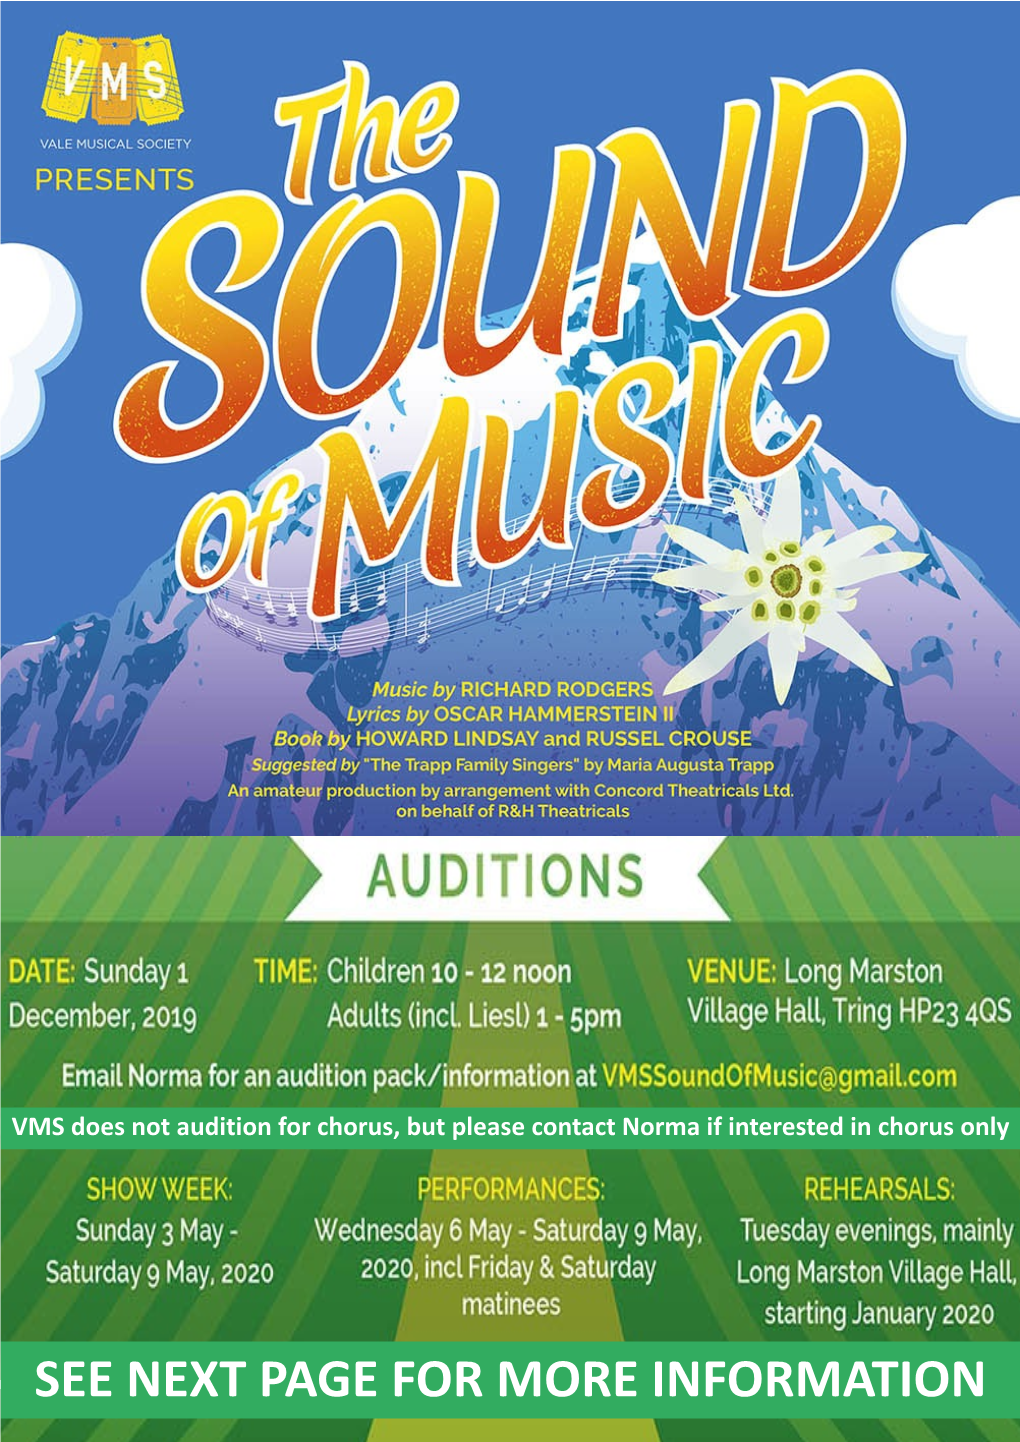 Audition for Chorus, but Please Contact Norma If Interested in Chorus Only